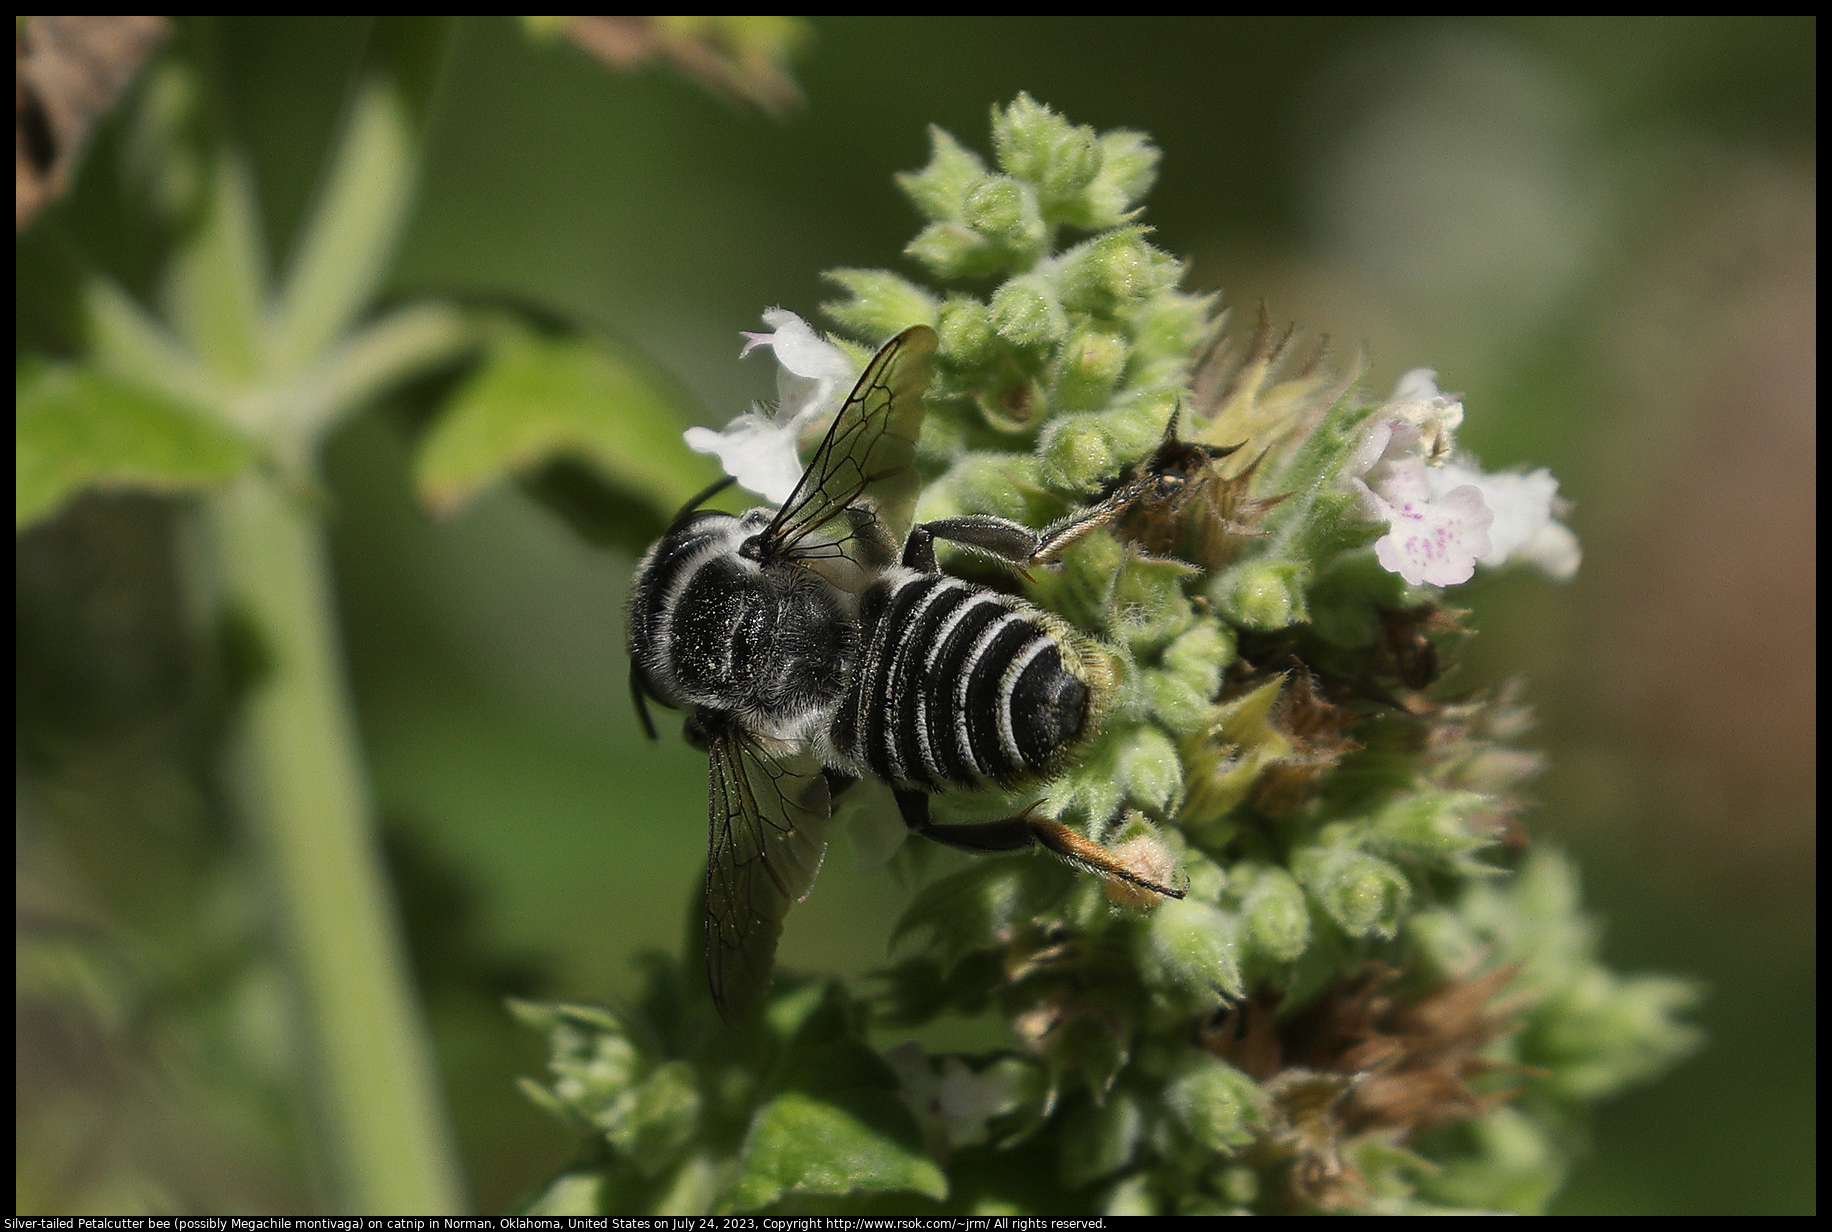 Silver-tailed Petalcutter bee (possibly Megachile montivaga) on catnip in Norman, Oklahoma, United States on July 24, 2023